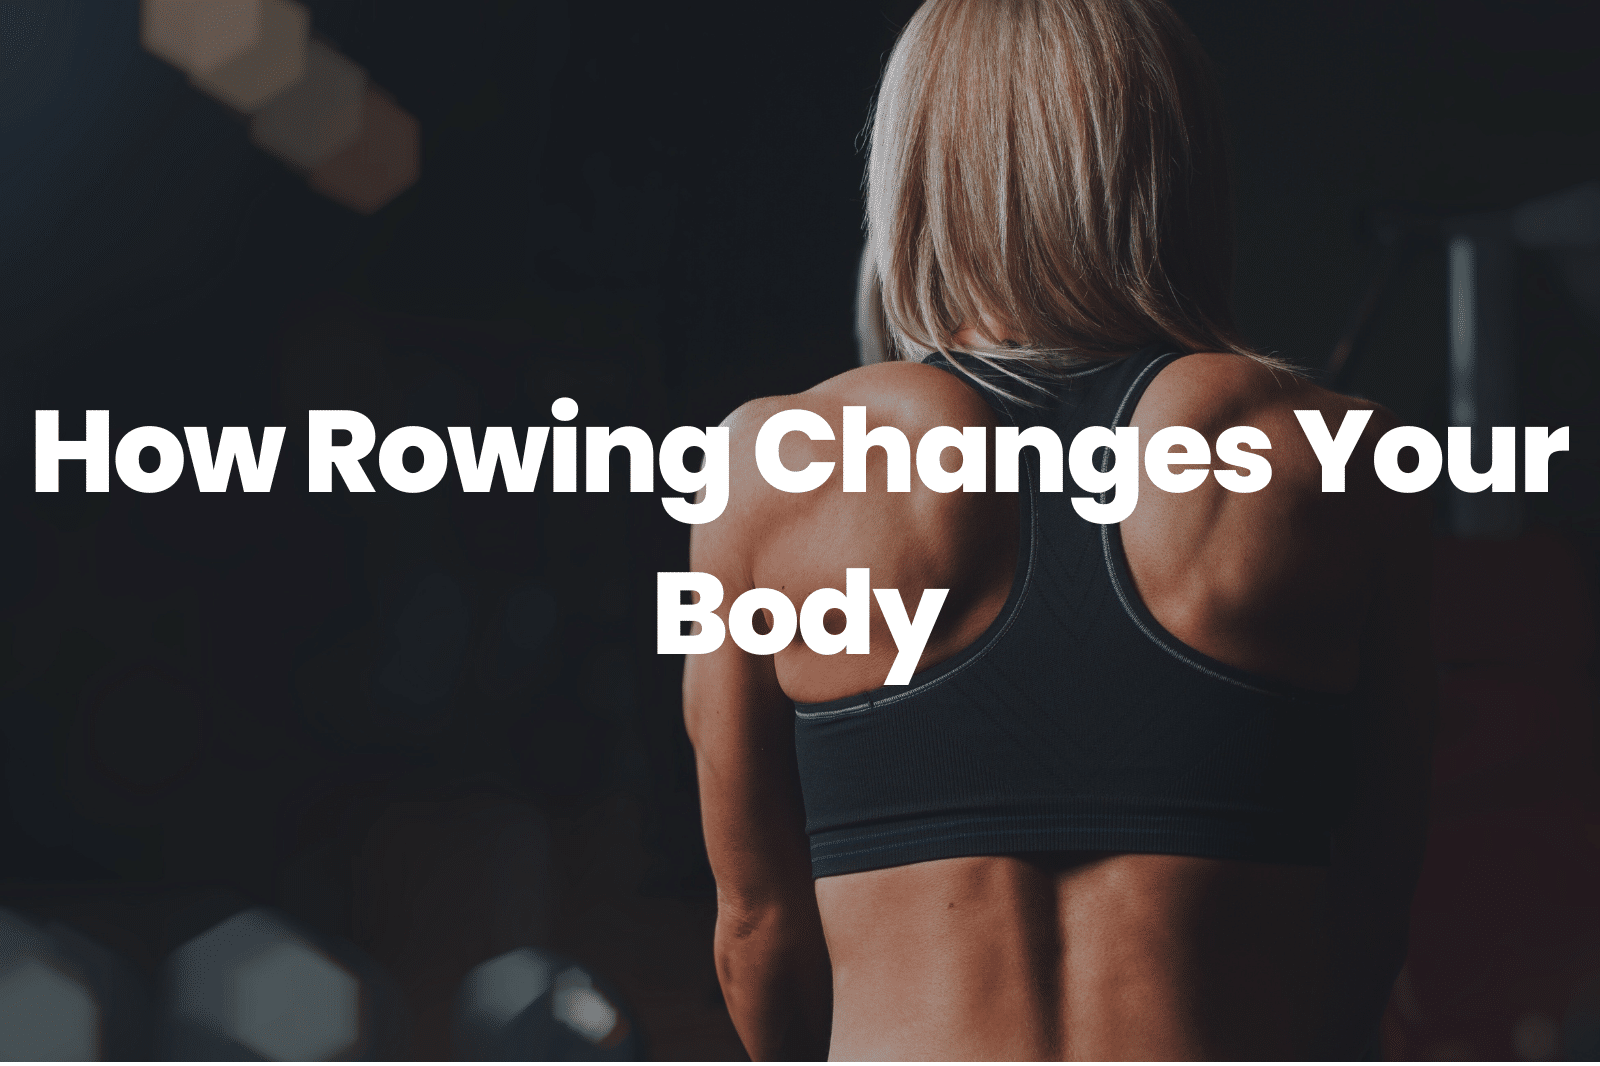 Rowing Changes